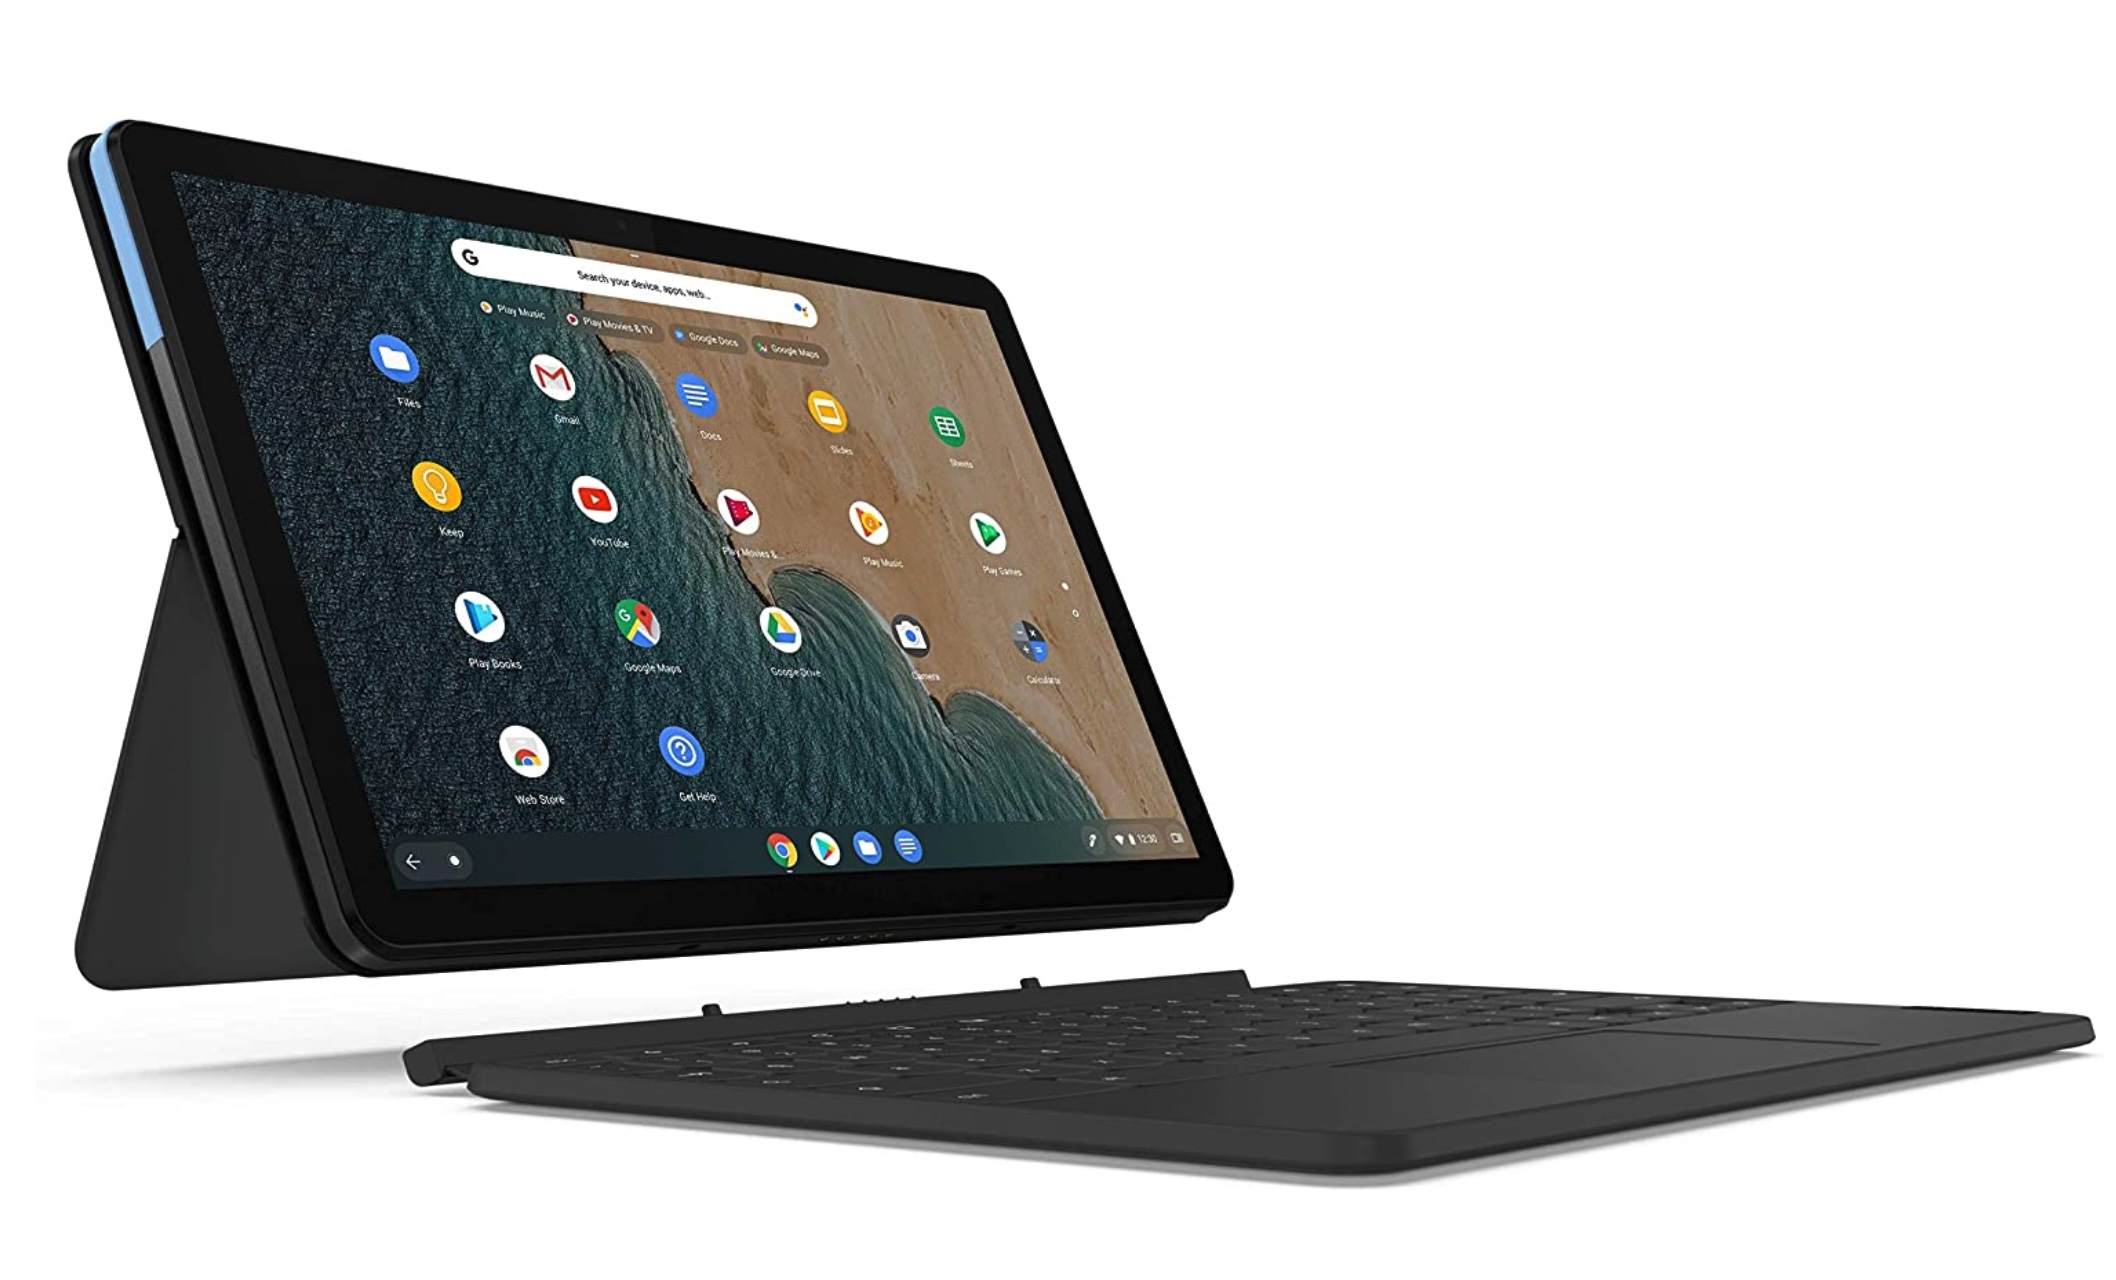 What about the Lenovo Chromebook IdeaPad Duet?